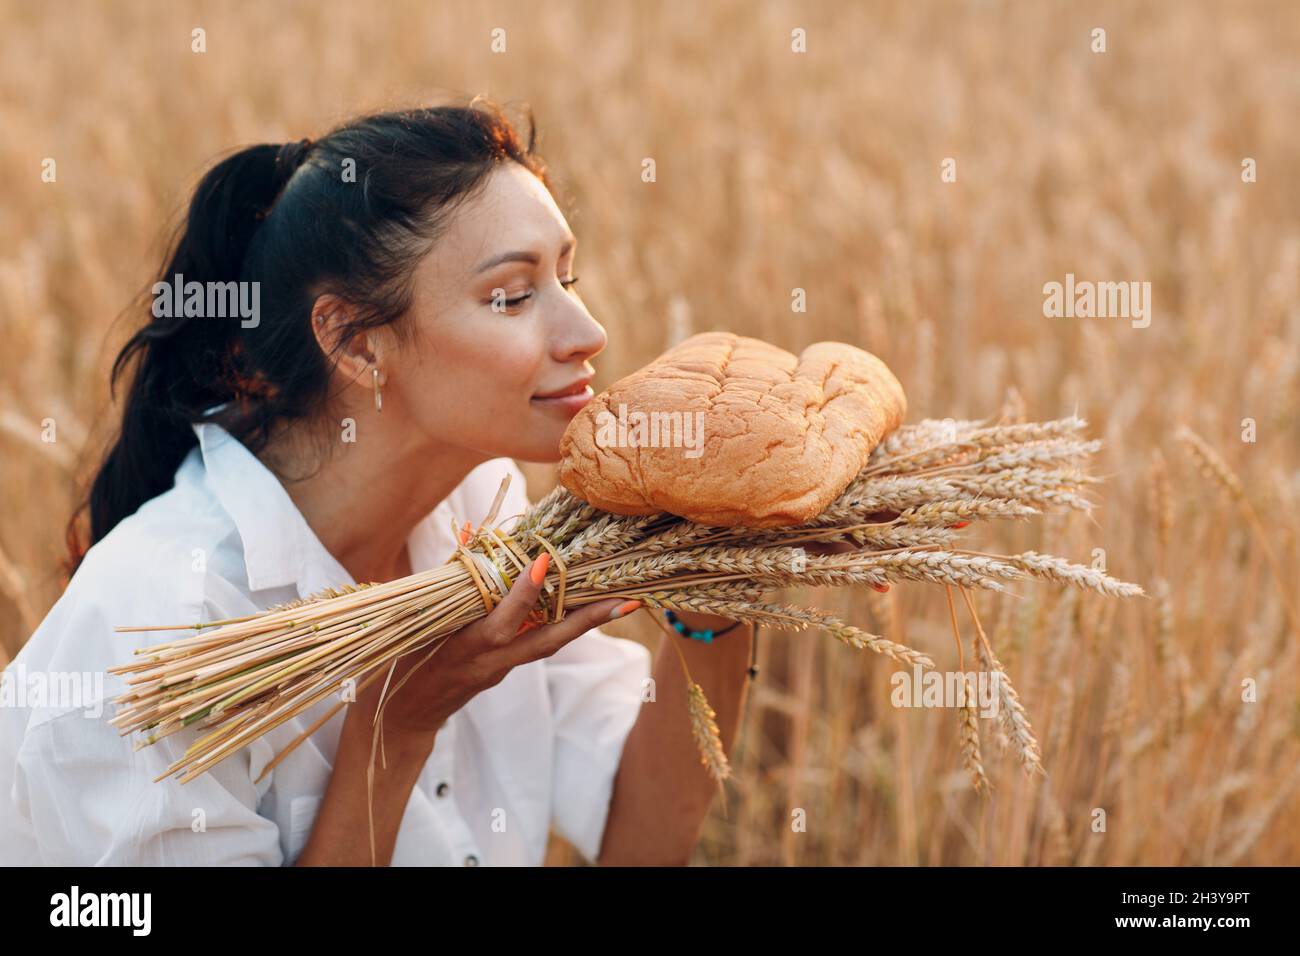 Woman Holding and Smelling Homemade Wheat Bread and Sheaf of Ears In Hands In Wheat Field at Sunset. Stock Photo